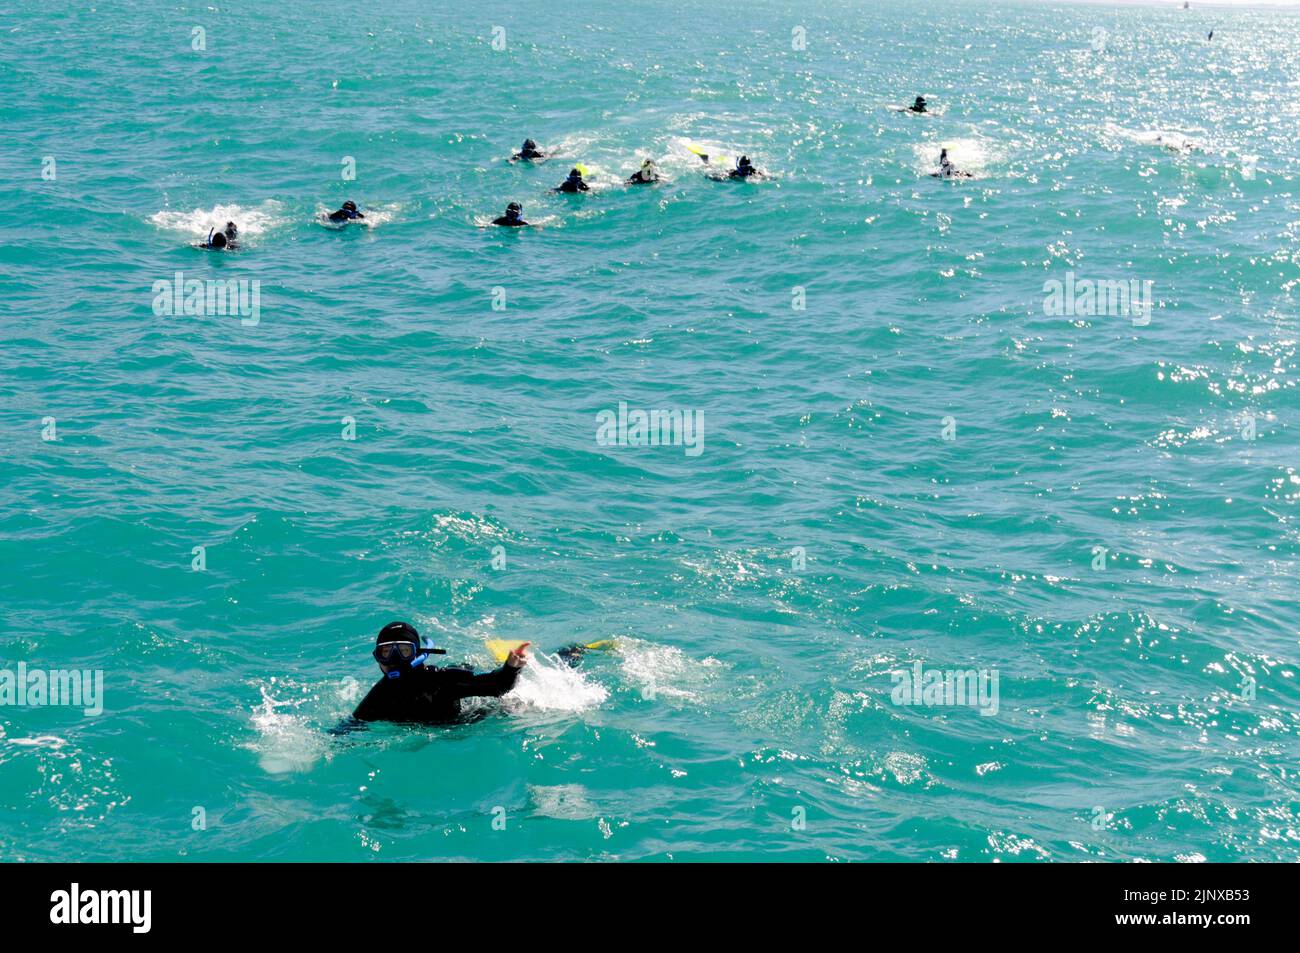 A small party of tourists in wet suits and goggles from a Swim with dolphin boat, try to swim closer to a pod of Dusky dolphins in the Pacific Ocean Stock Photo